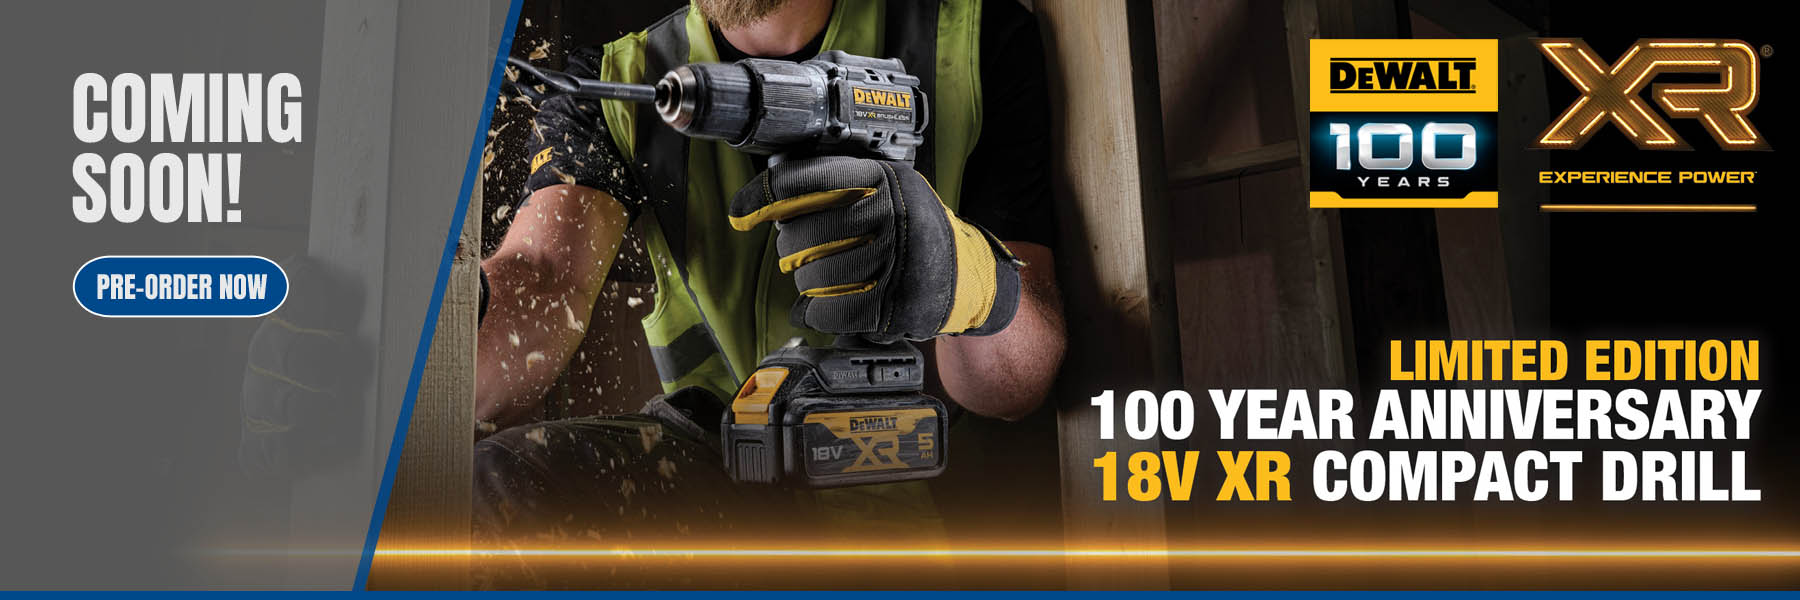 SHOP NOW - DeWalt 100 Year DCD100P2T 18v Cordless Combi Drill Kit - LIMITED EDITION